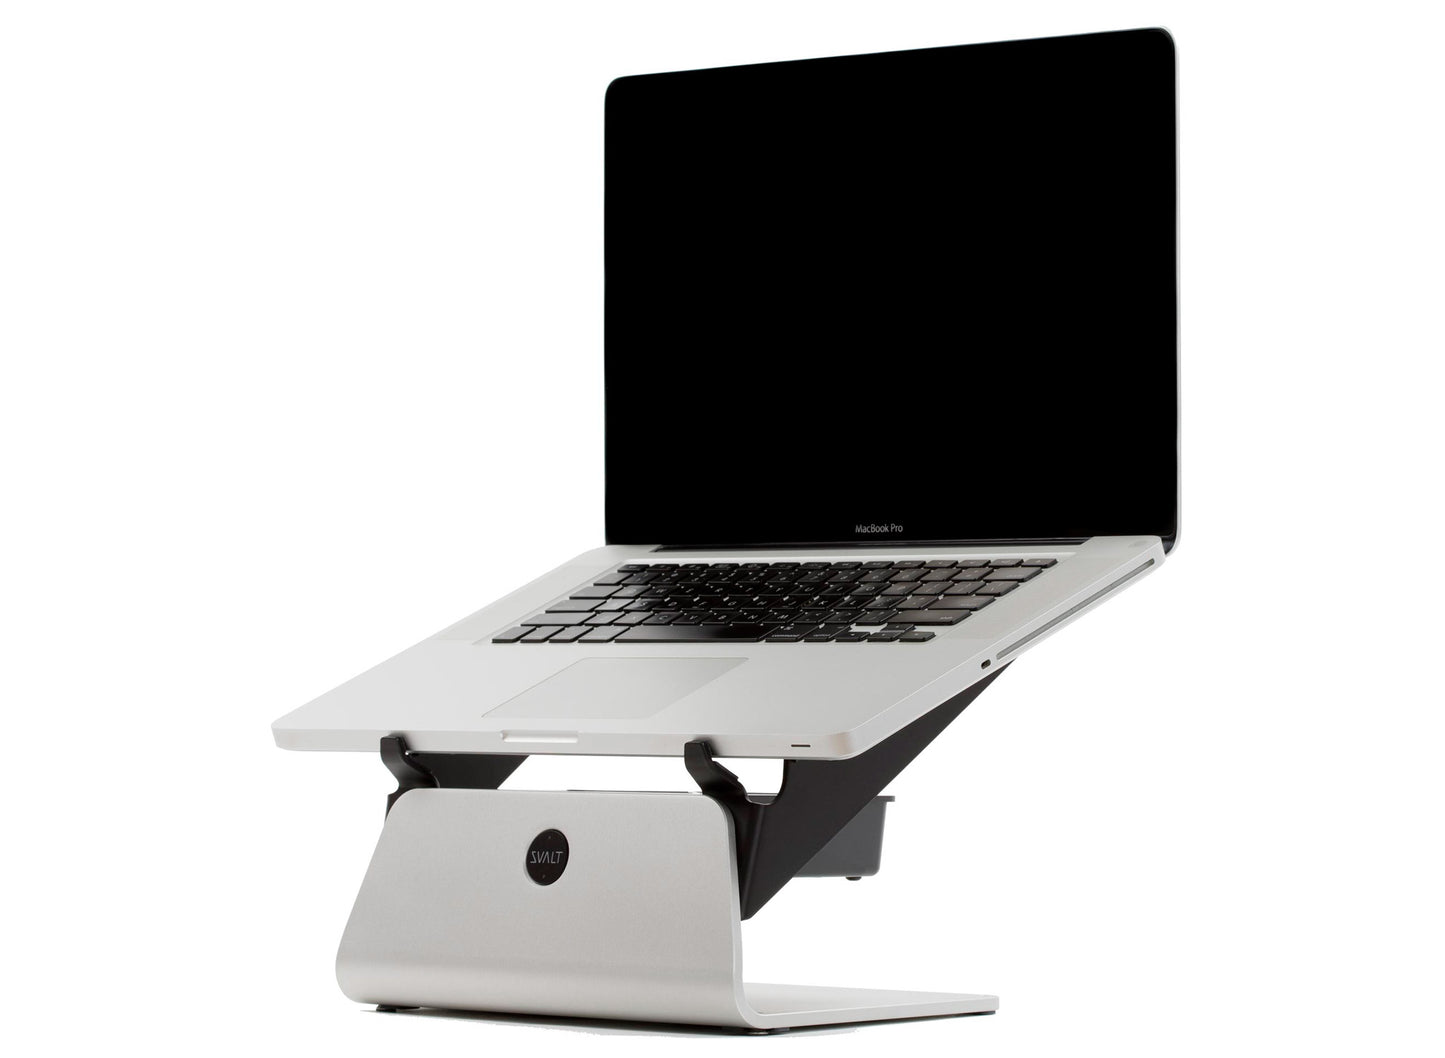 SVALT Cooling Stand model SxG17 silver front side view for quiet fan cooling performance with Apple and PC laptops